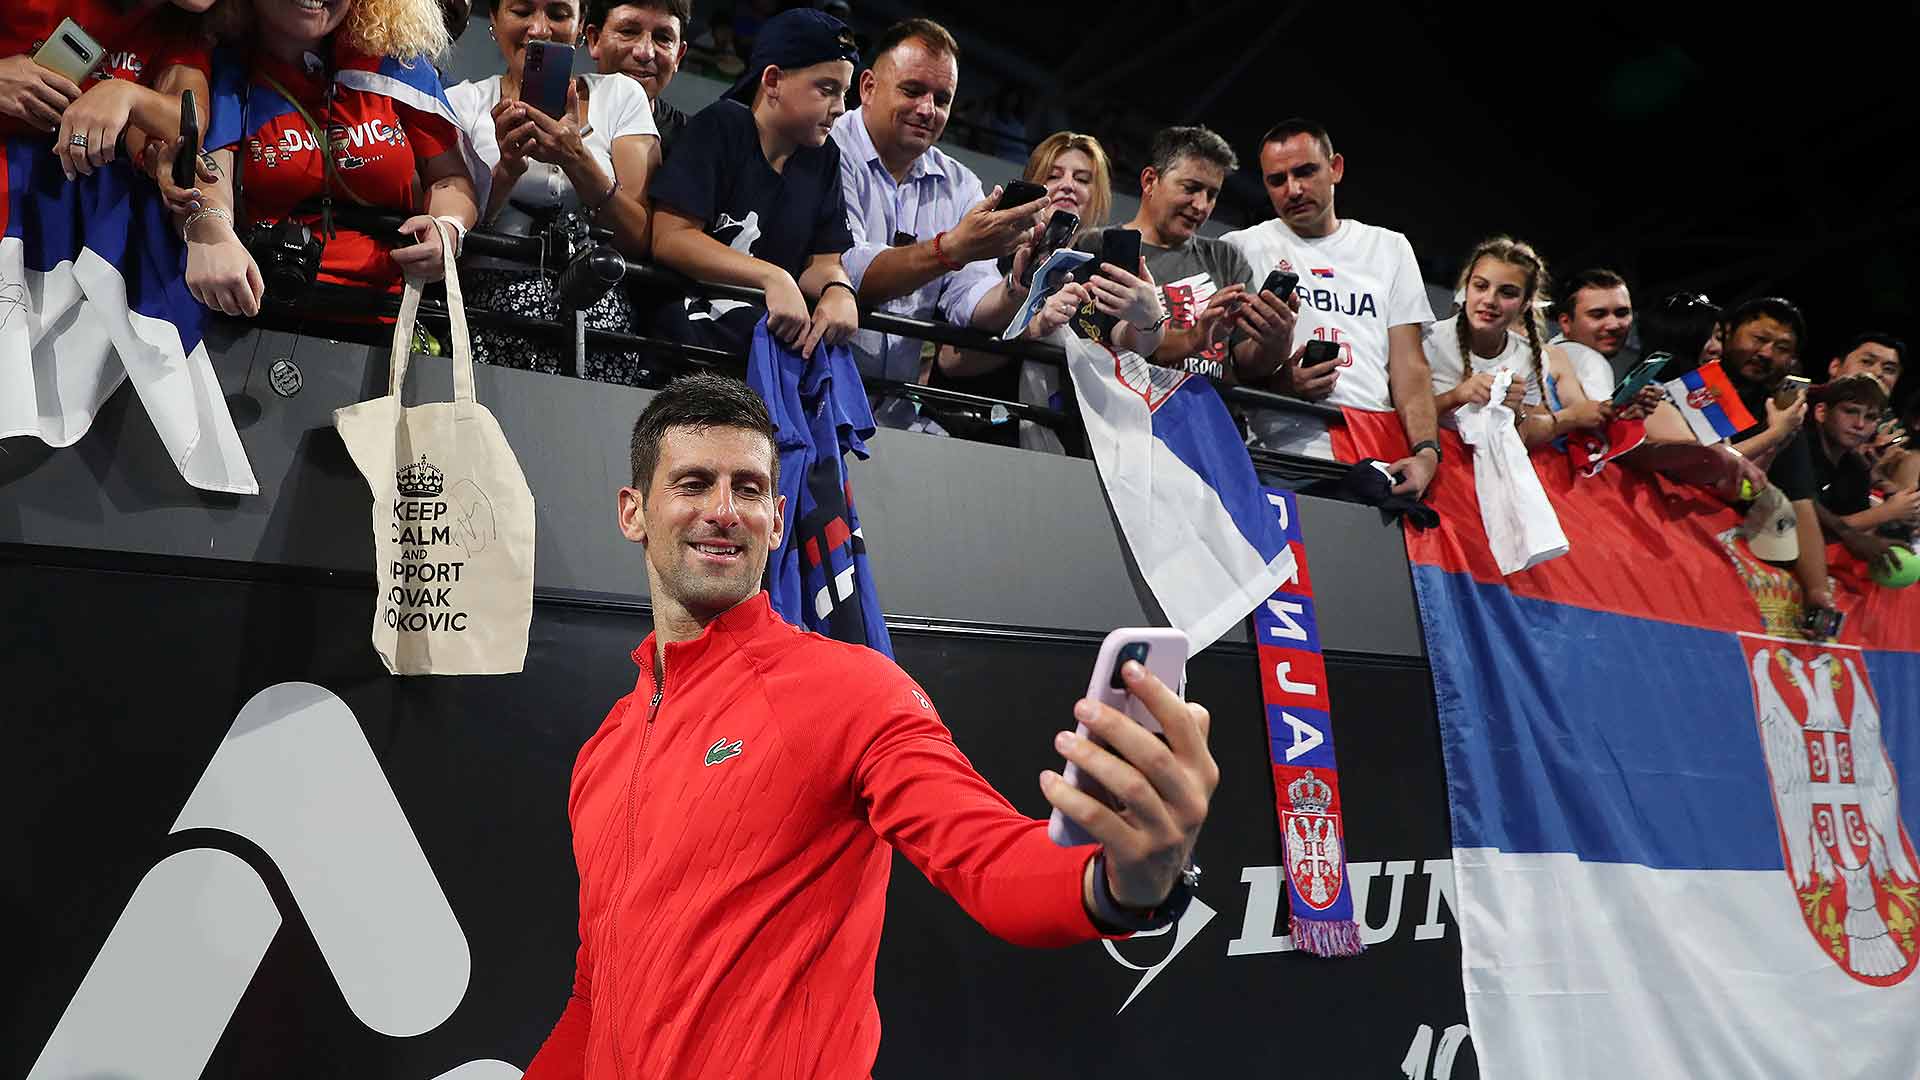 Novak Djokovic celebrates his 92nd tour-level title with Serbian fans in Adelaide.